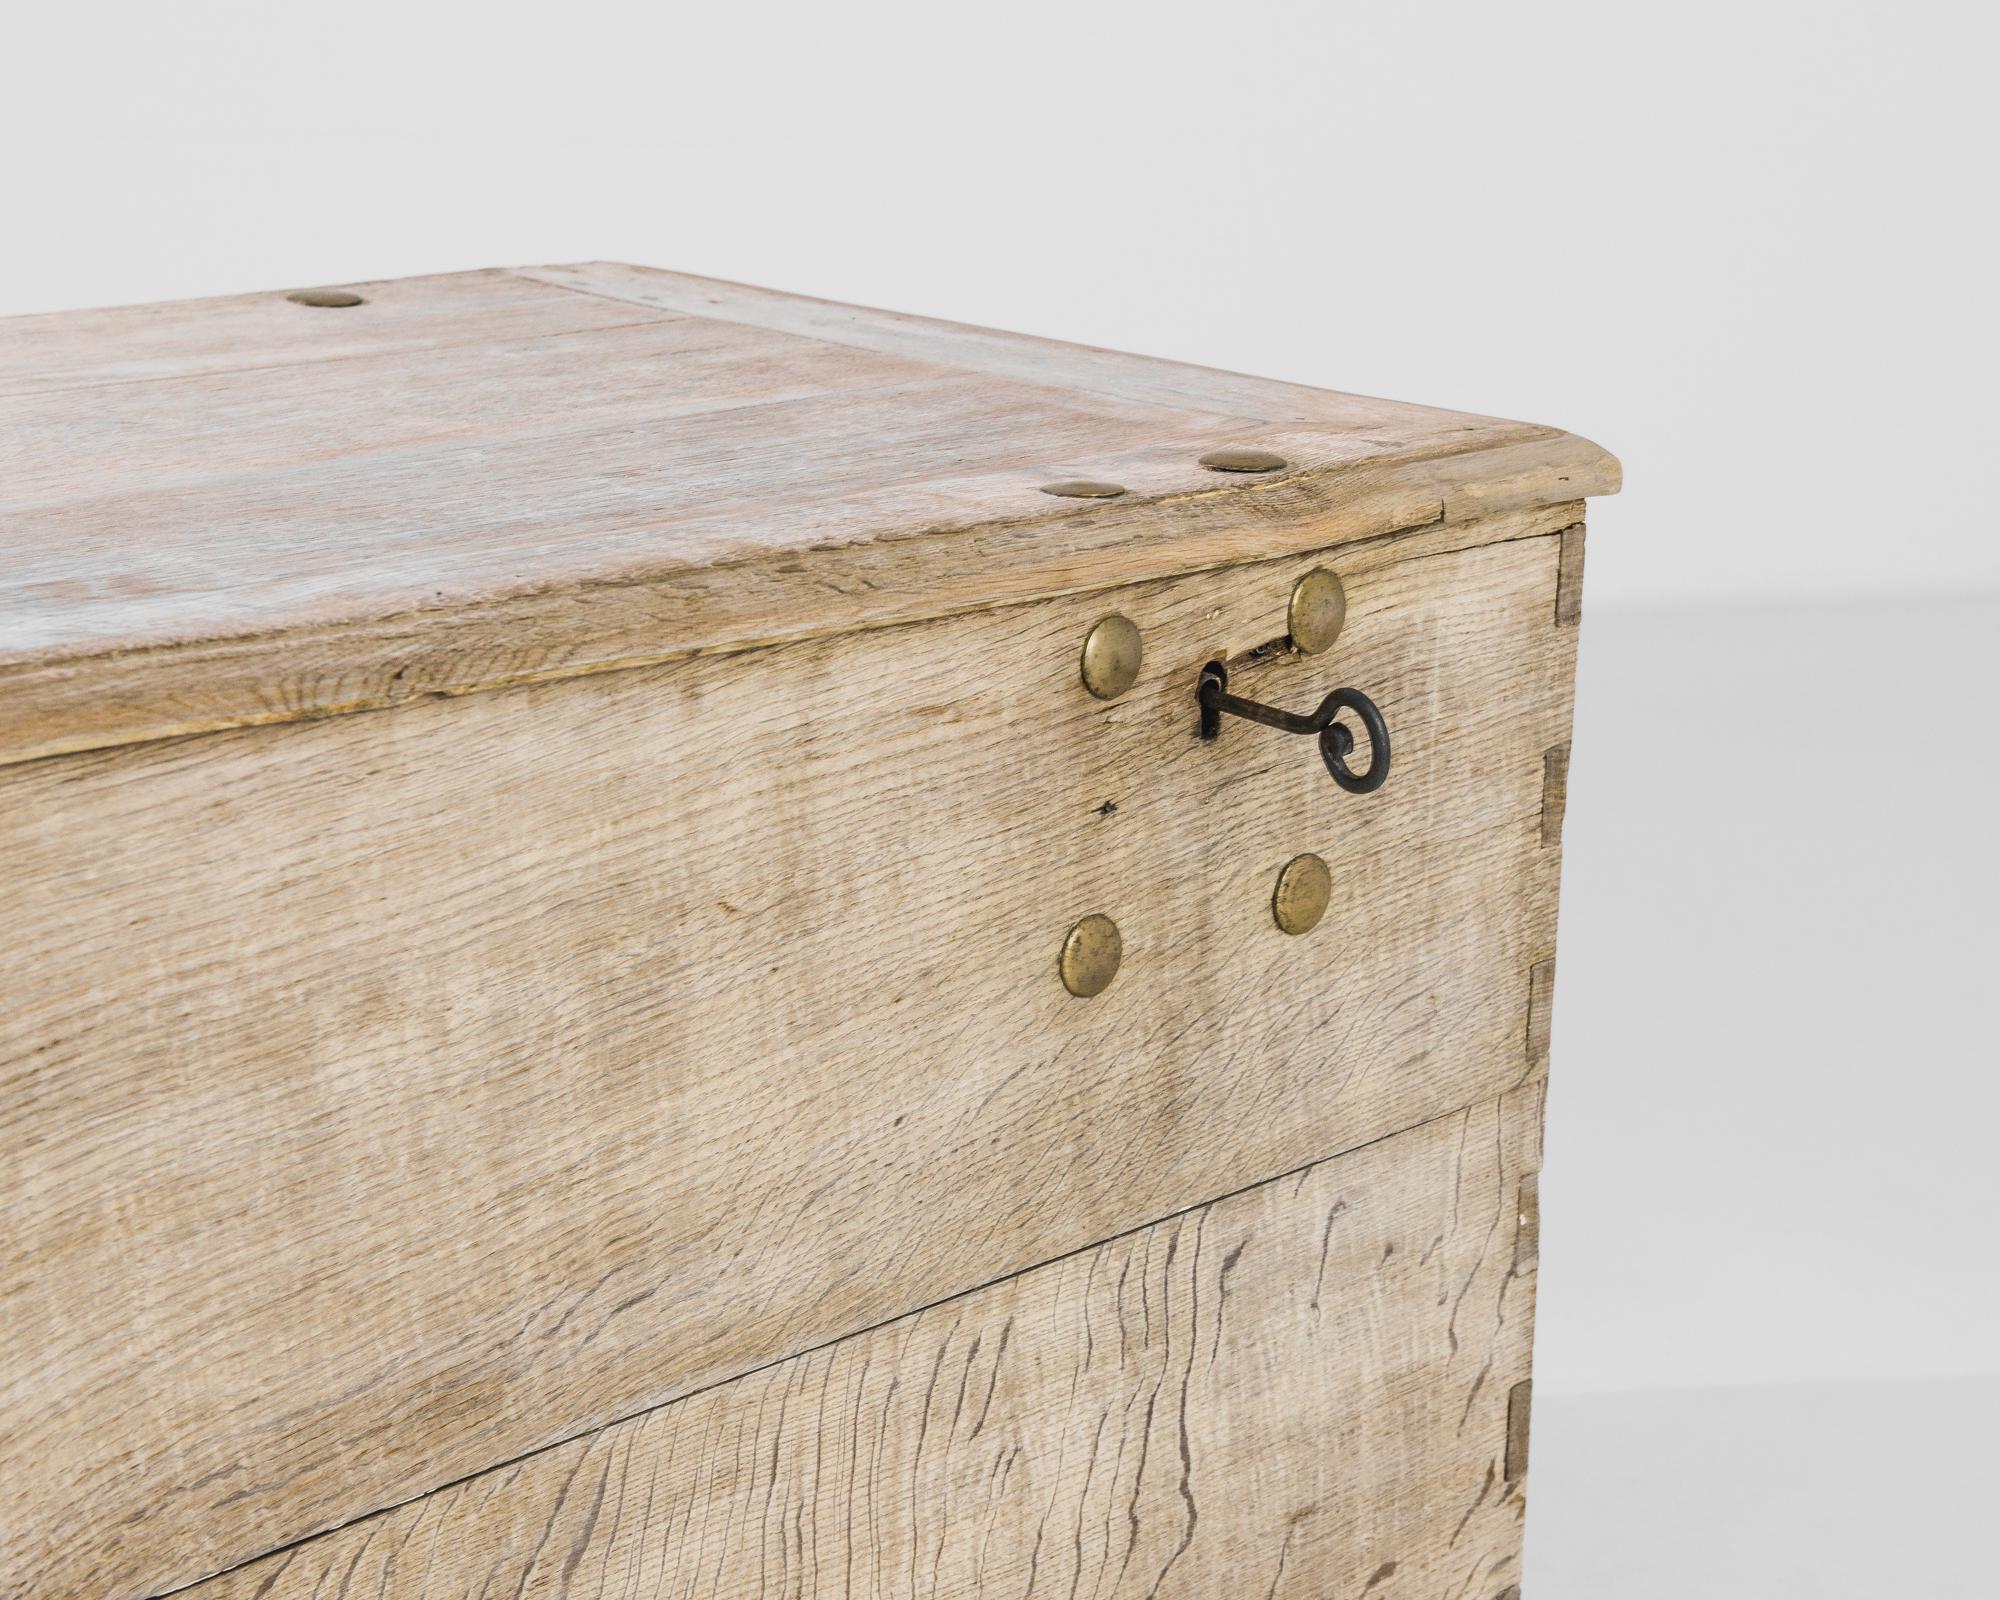 An oak trunk, made in France circa 1800. Dovetail joints give an appealing variation to the corners of the case: a decorative accent born of skillful craftsmanship. Large brass studs frame the key holes, which lock with an original spiral key. The